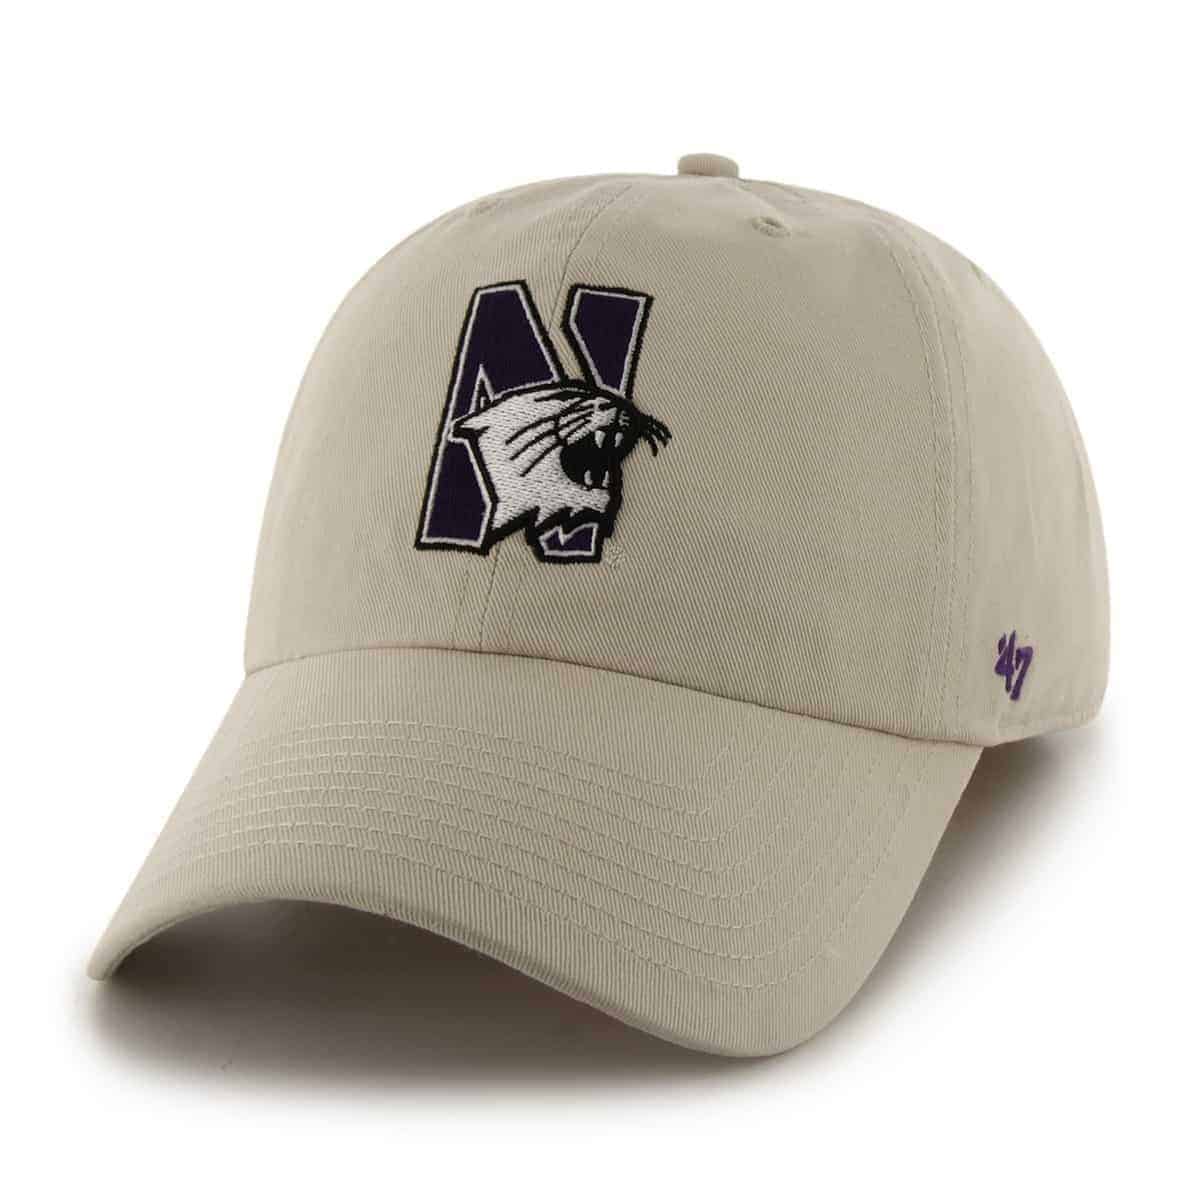 Northwestern Wildcats Adidas Unconstructed White Adjustable Hat with N-Cat  Design